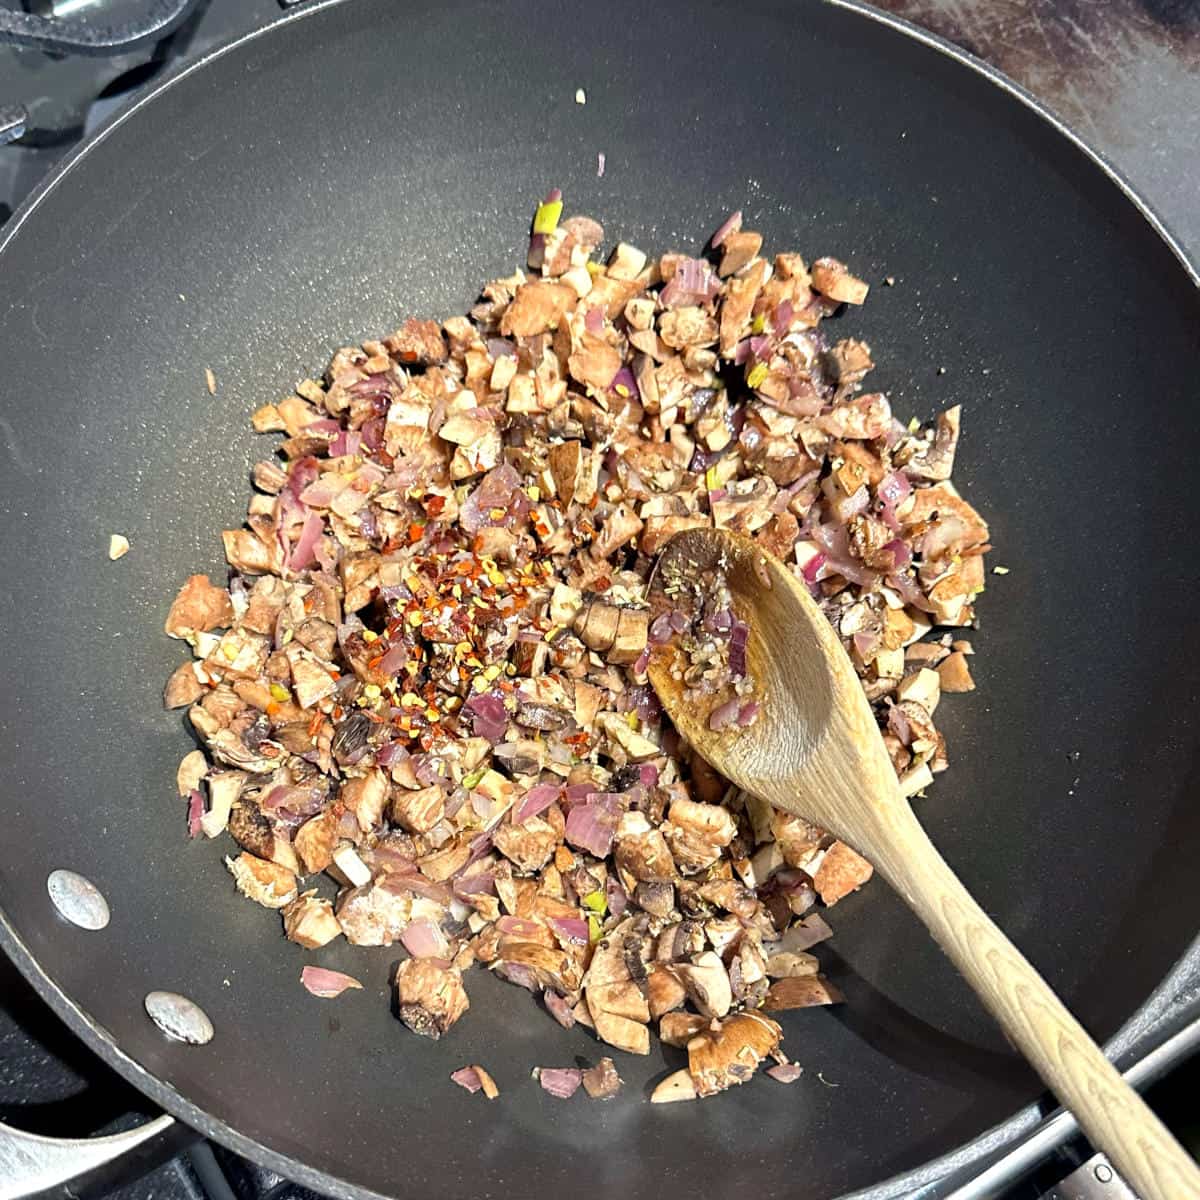 Red pepper flakes added to wok with mushrooms and herbs.